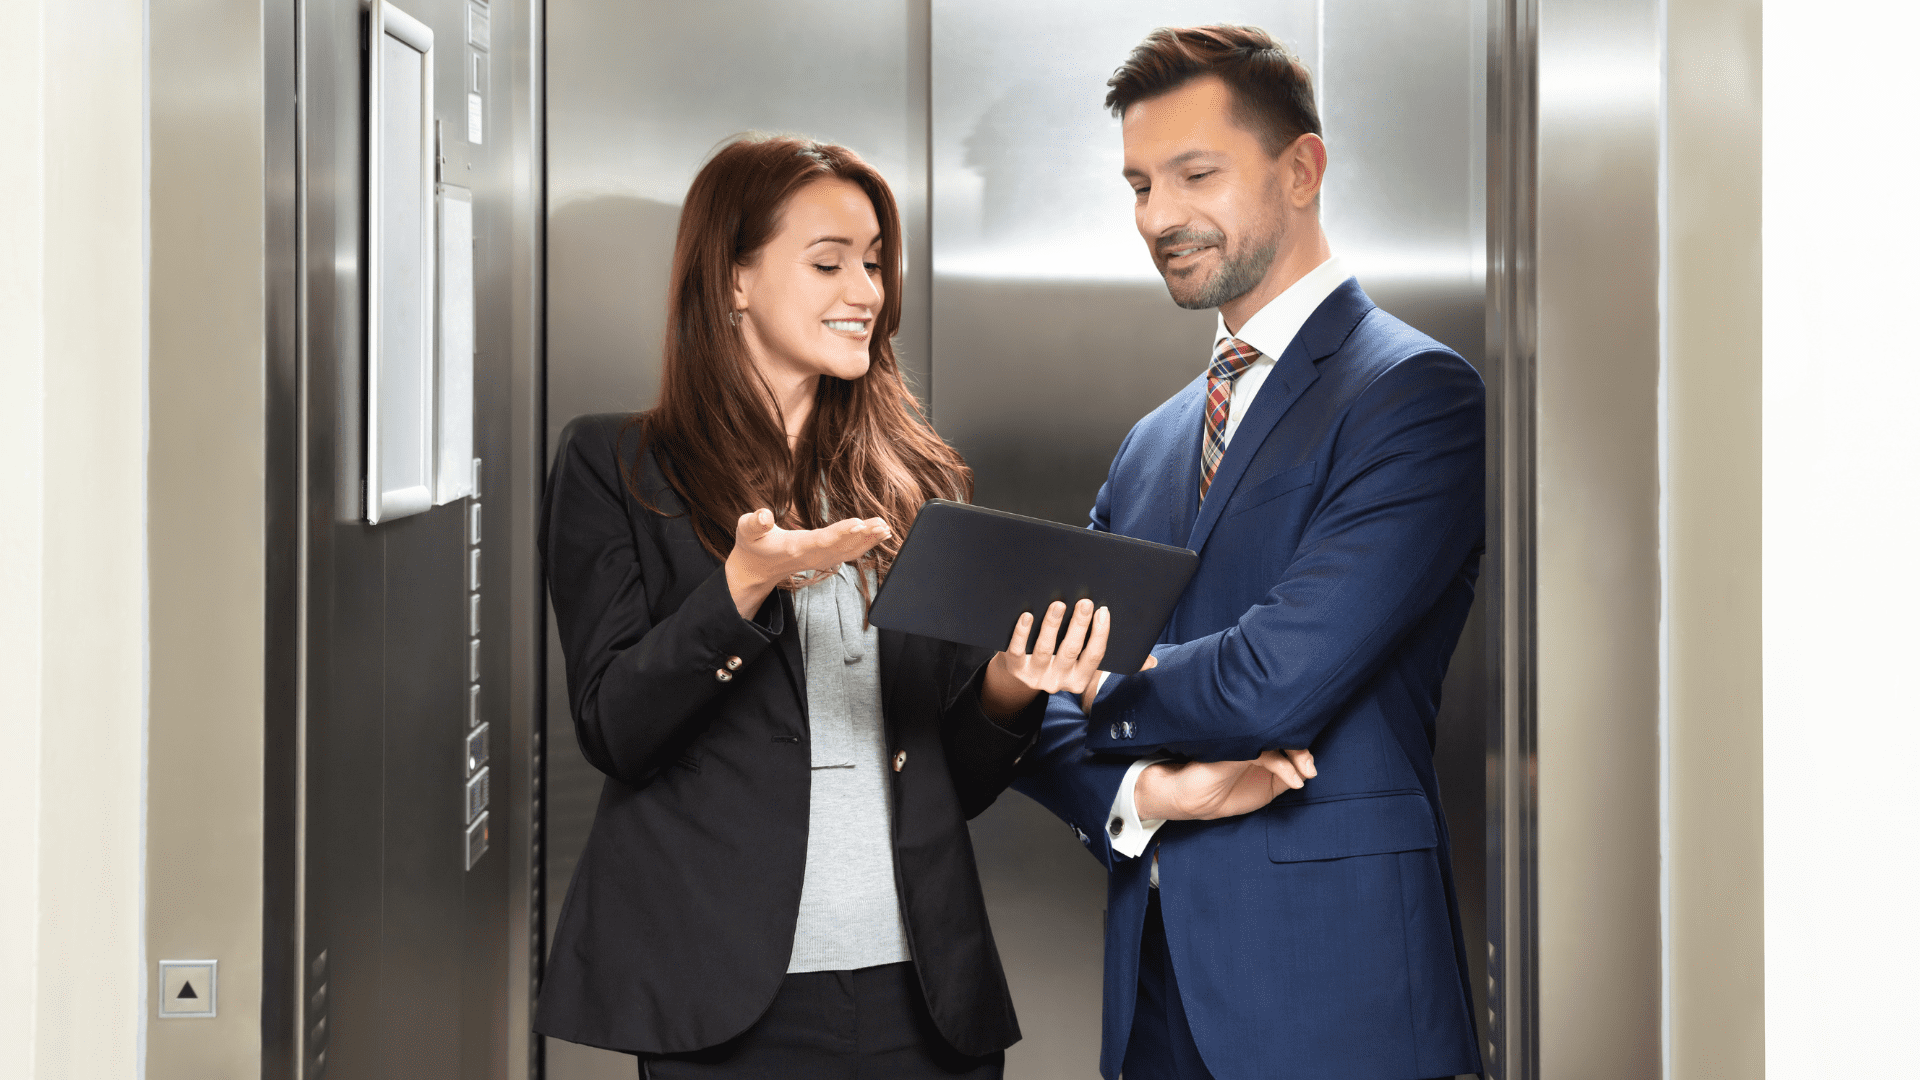 Two people discussing options in an elevator